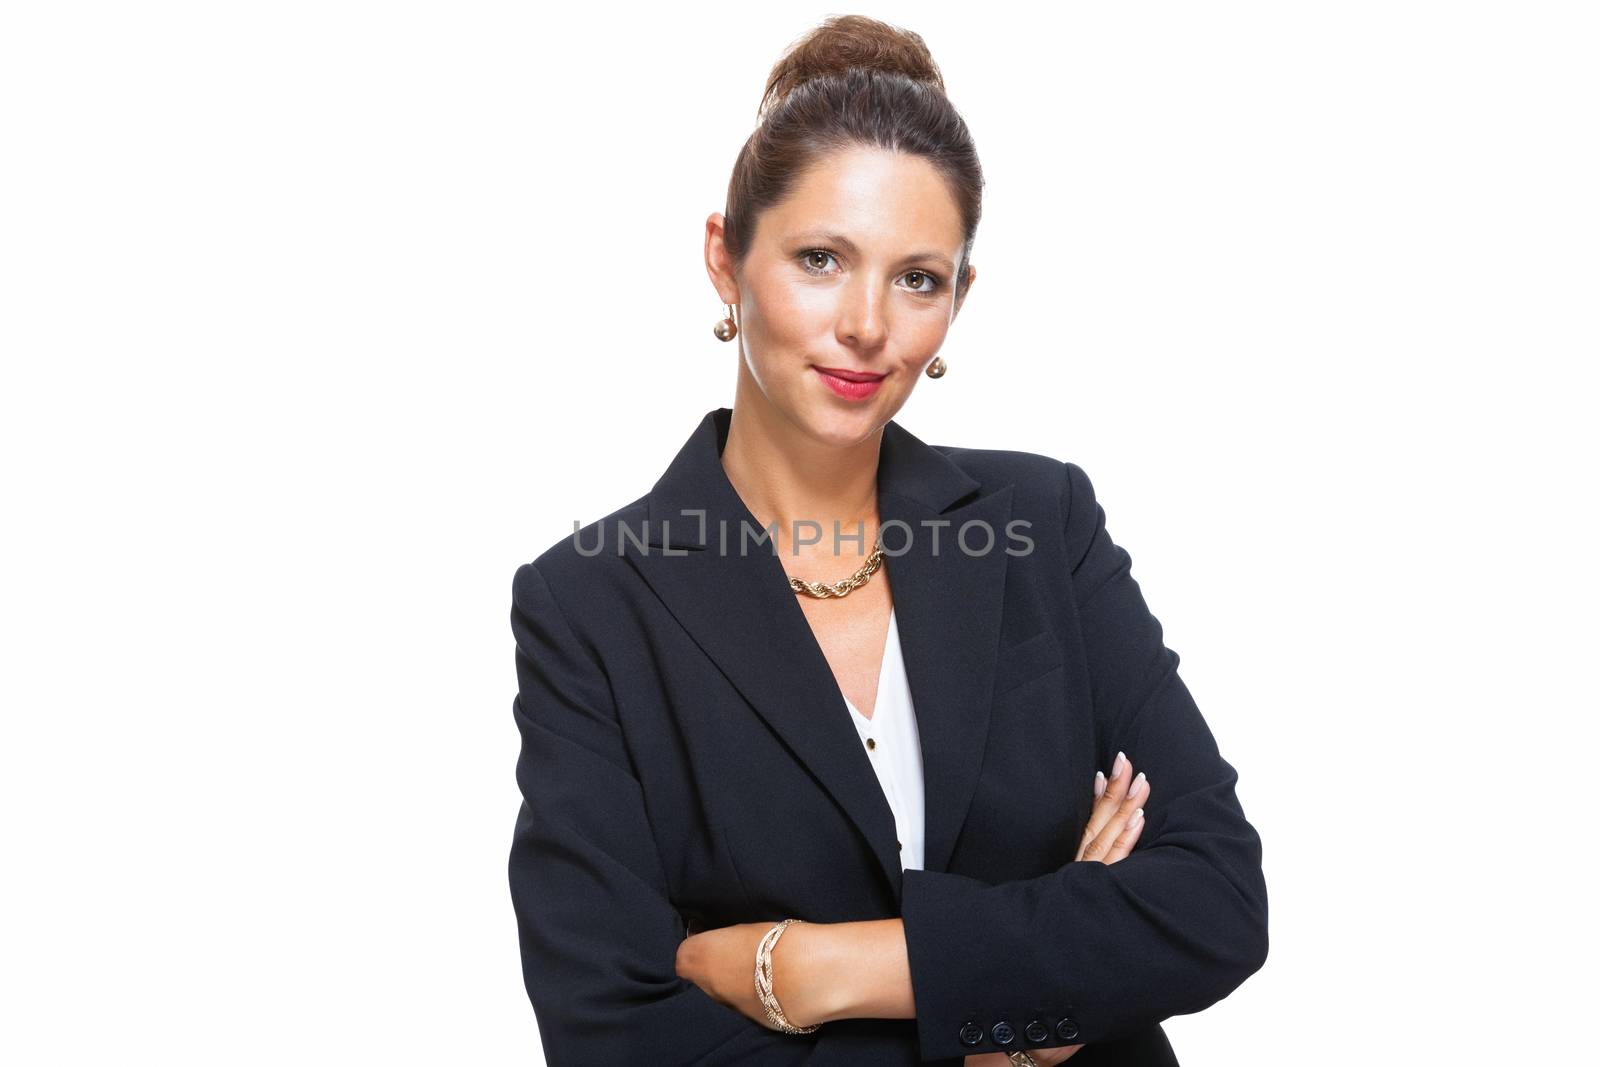 Portrait of a Confident Young Businesswoman in Black Suit, Smiling at the Camera with Arms Crossing Over her Stomach, Isolated on White Background